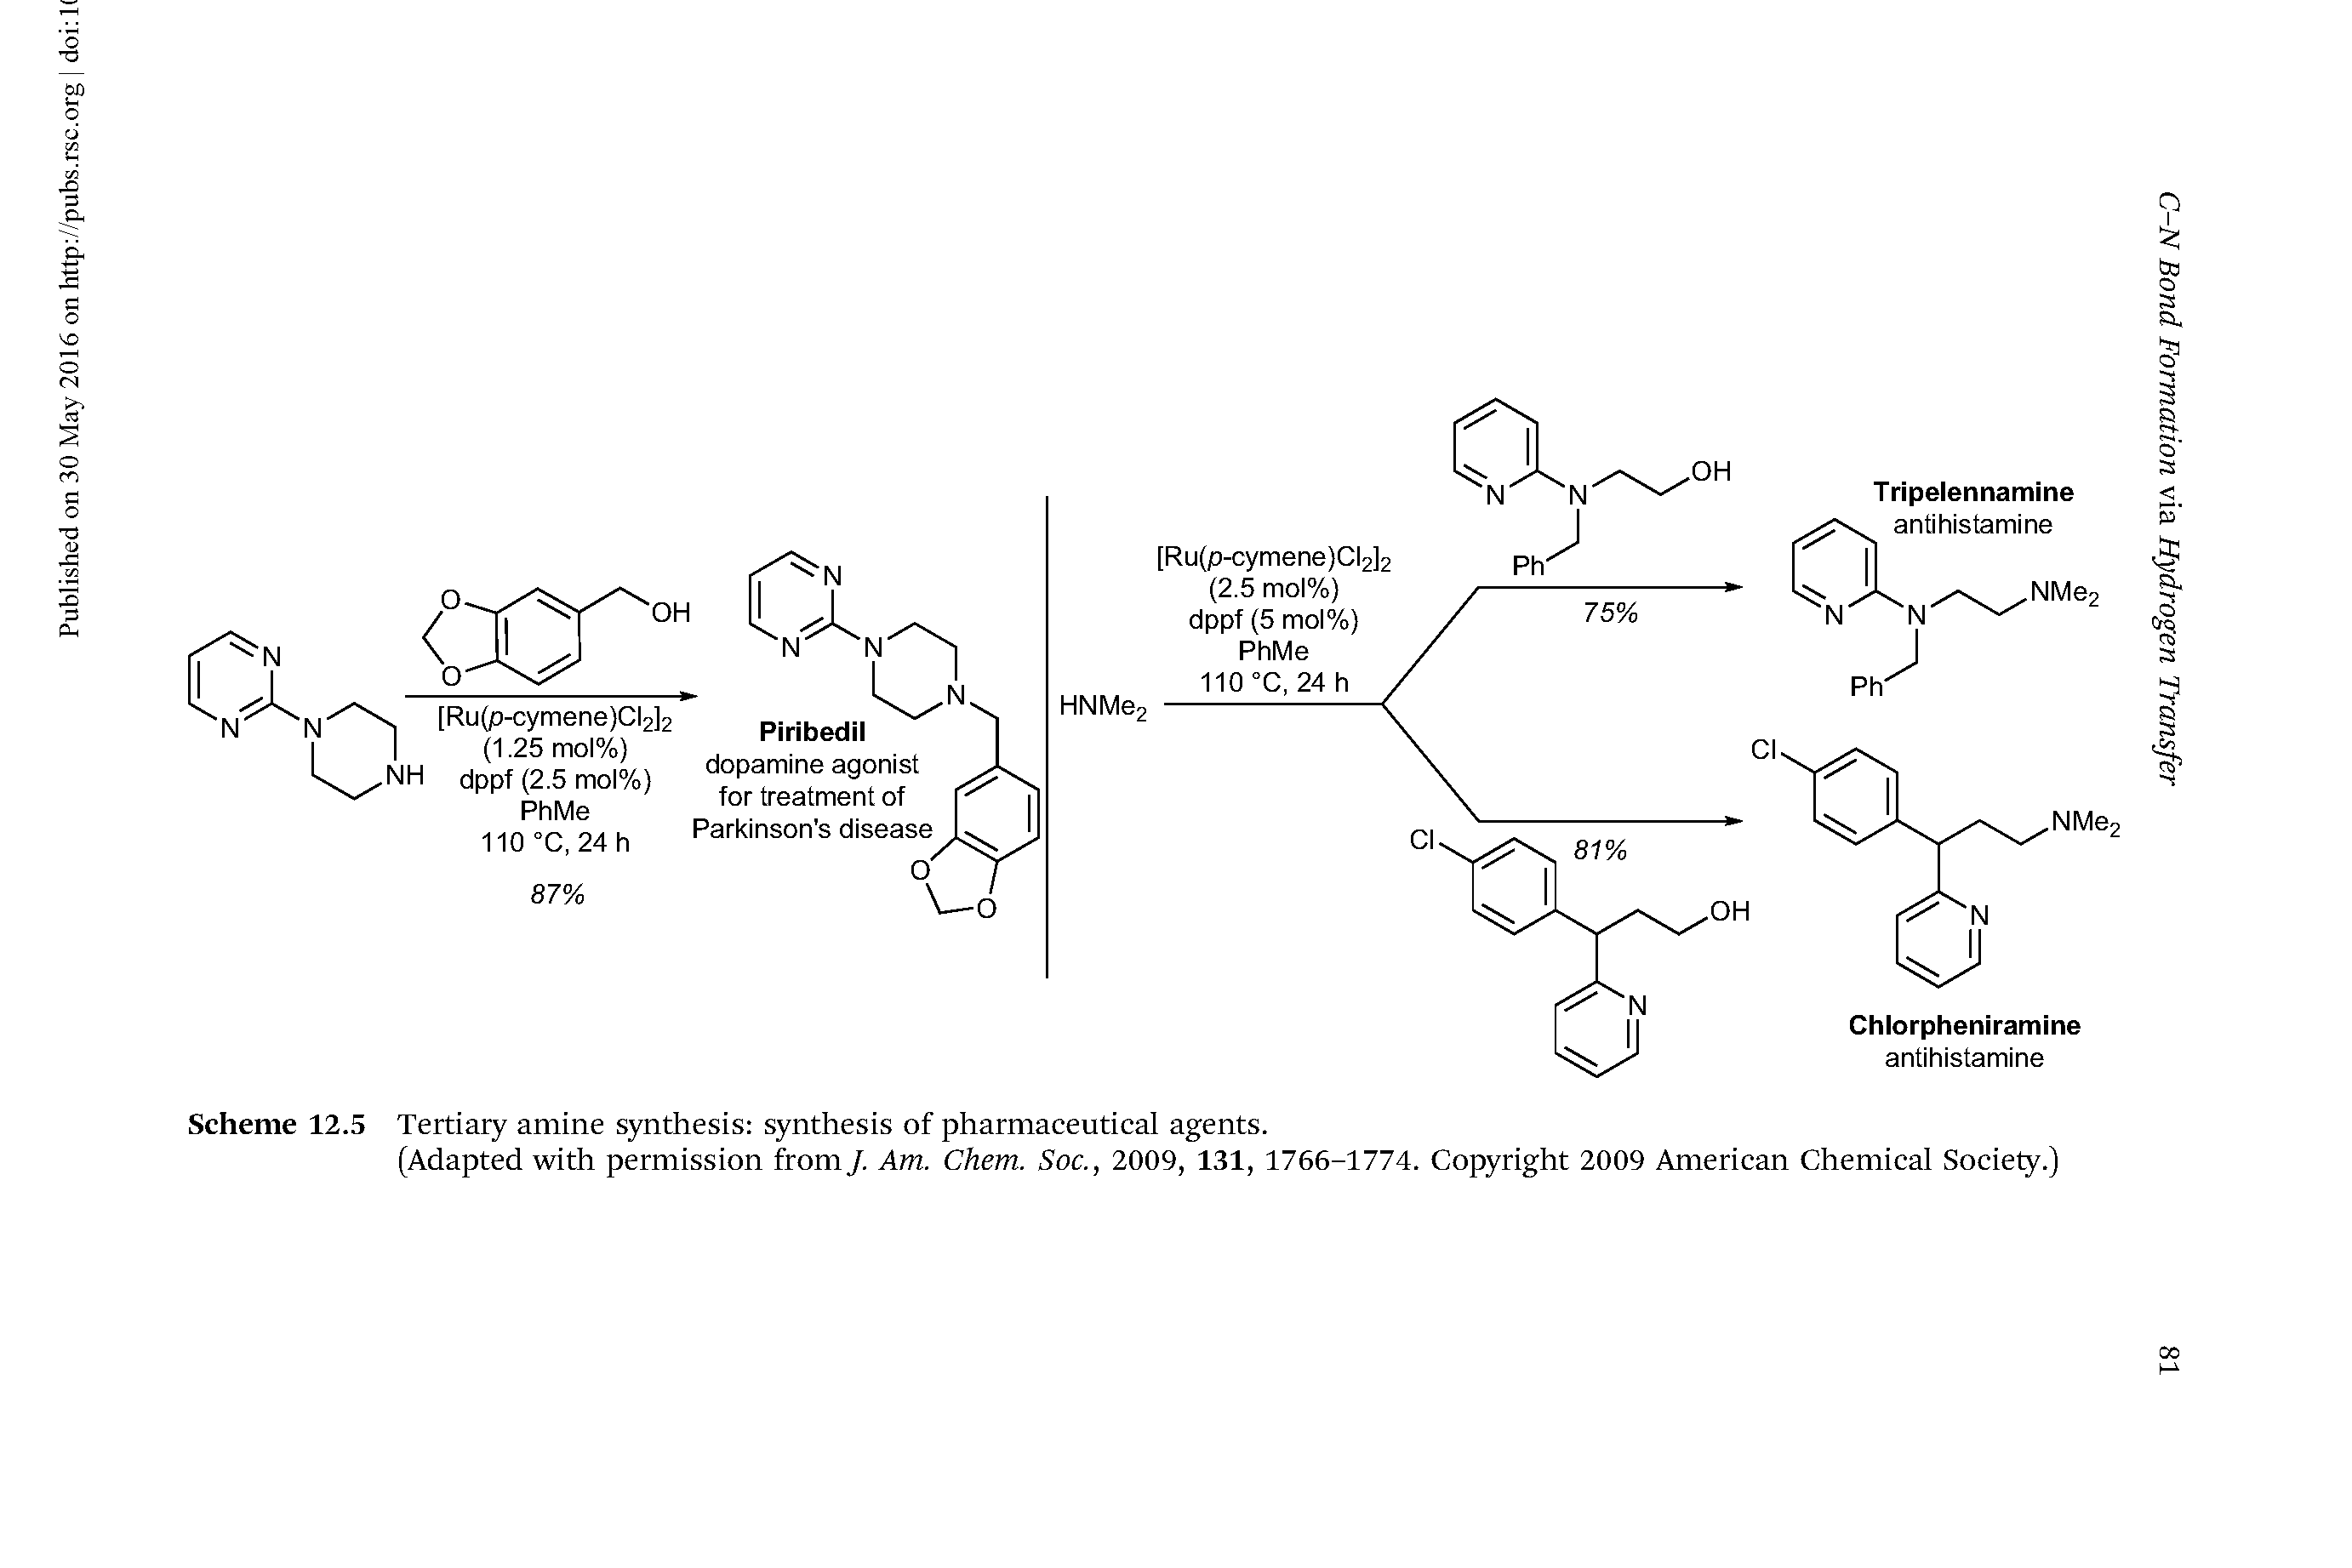 Scheme 12.5 Tertiary amine synthesis synthesis of pharmaceutical agents.